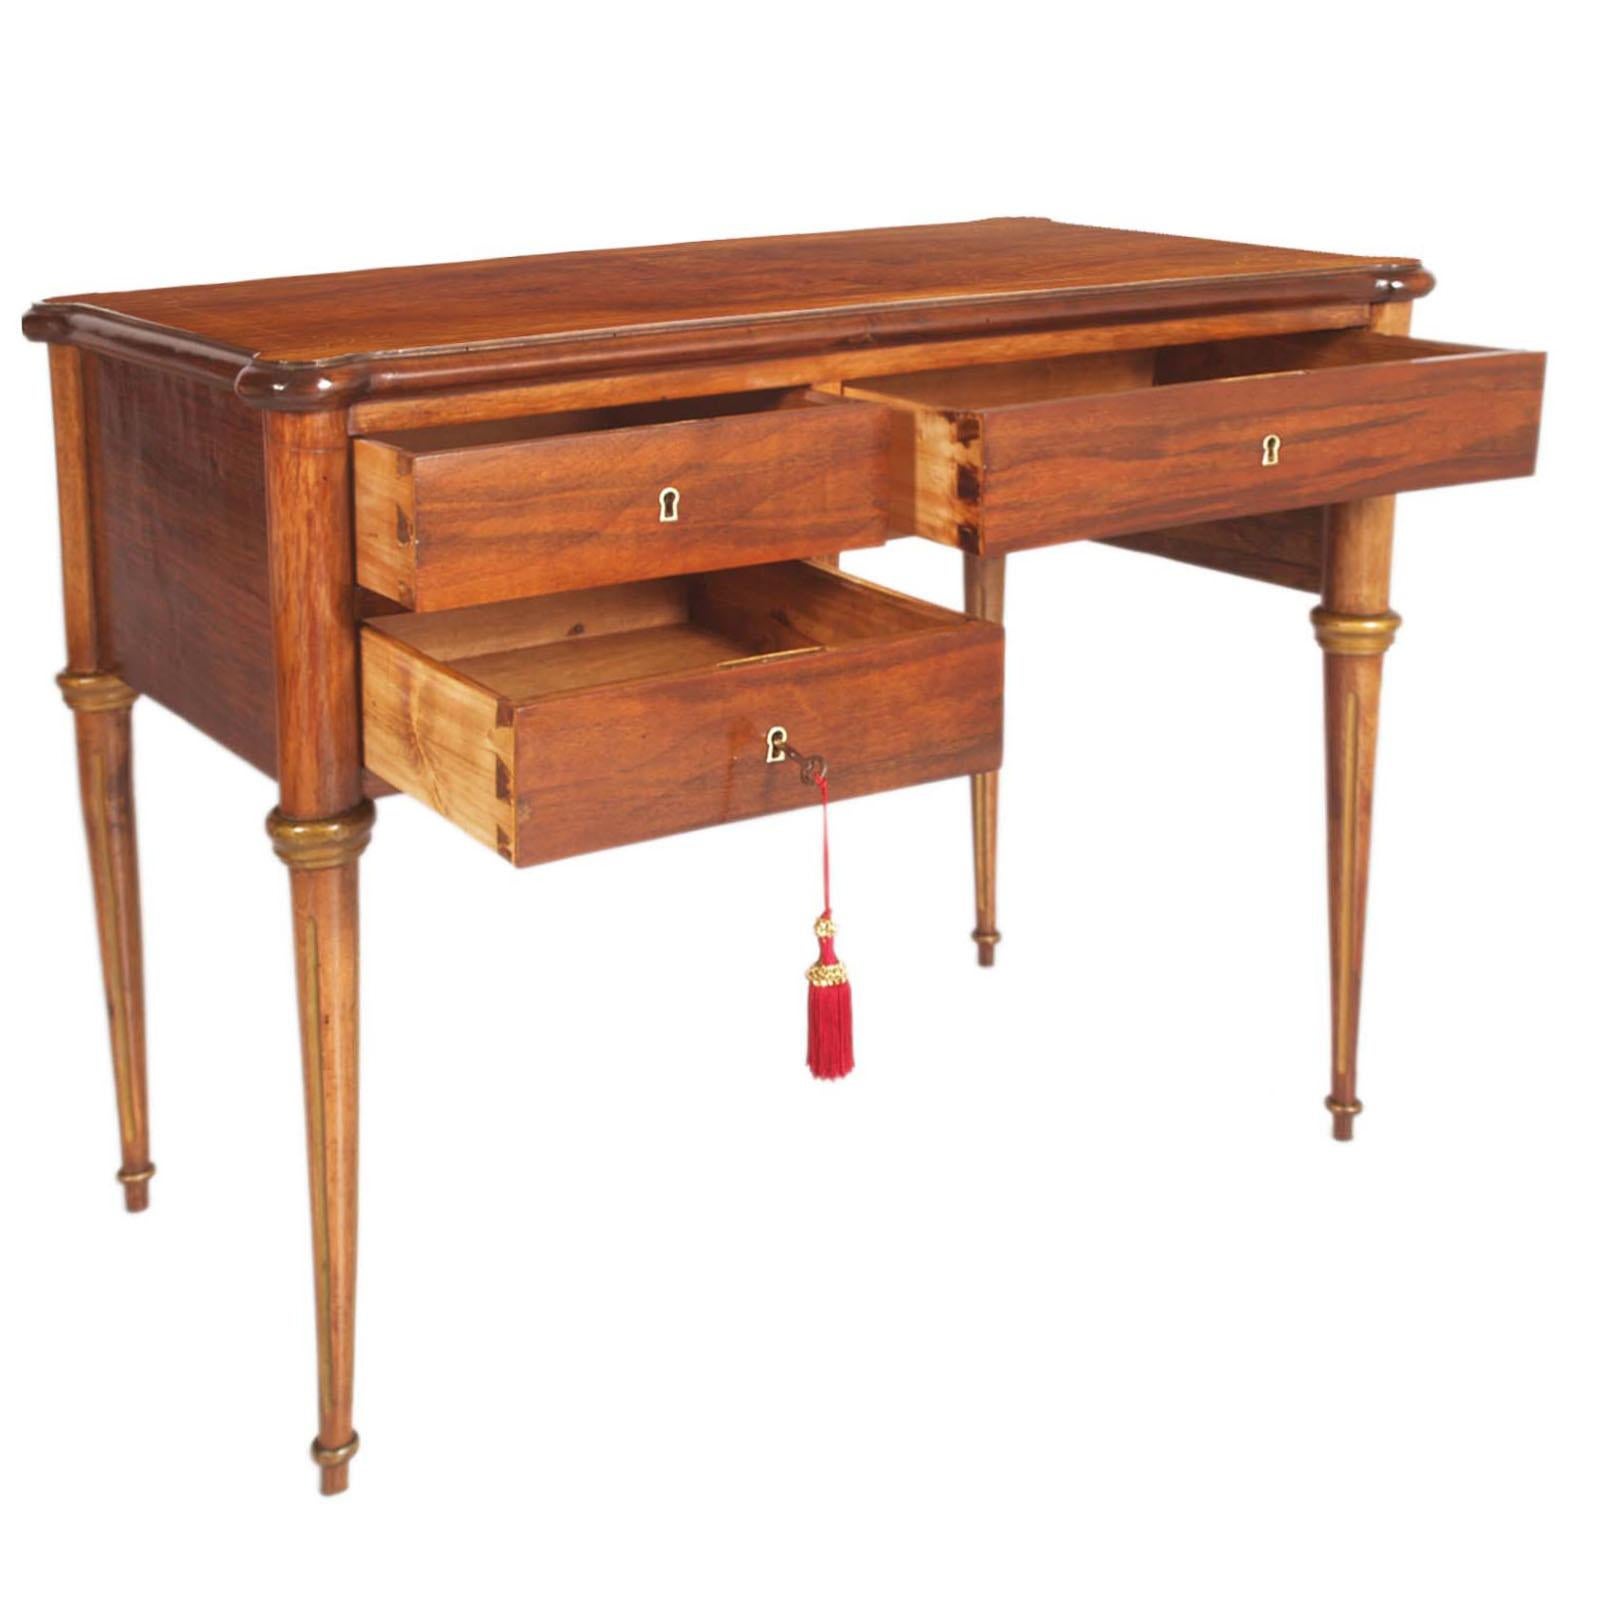 Directoire Early 20th Century Writing Desk in Walnut with Inlay by Meroni & Fossati For Sale